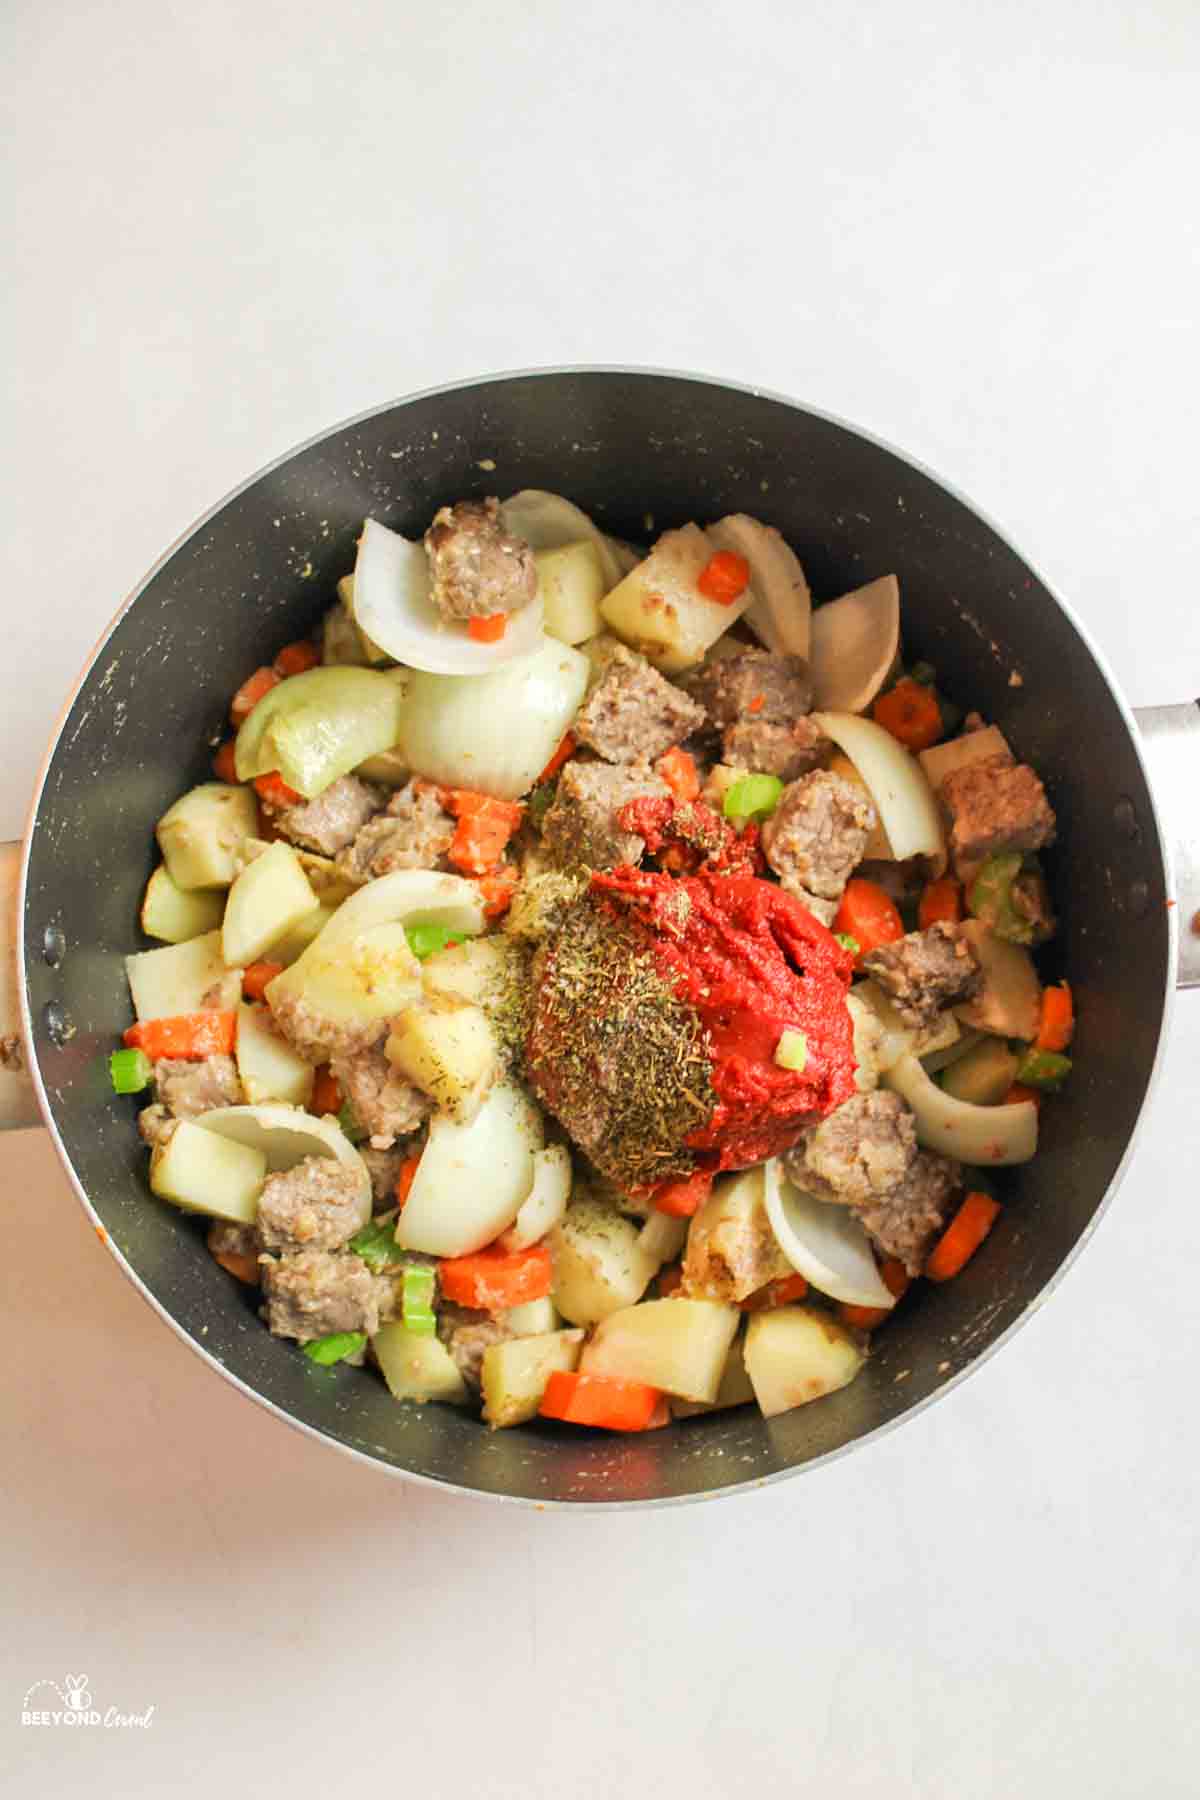 tomato paste and seasonings added to large pot with cooked veggies and stew meat.